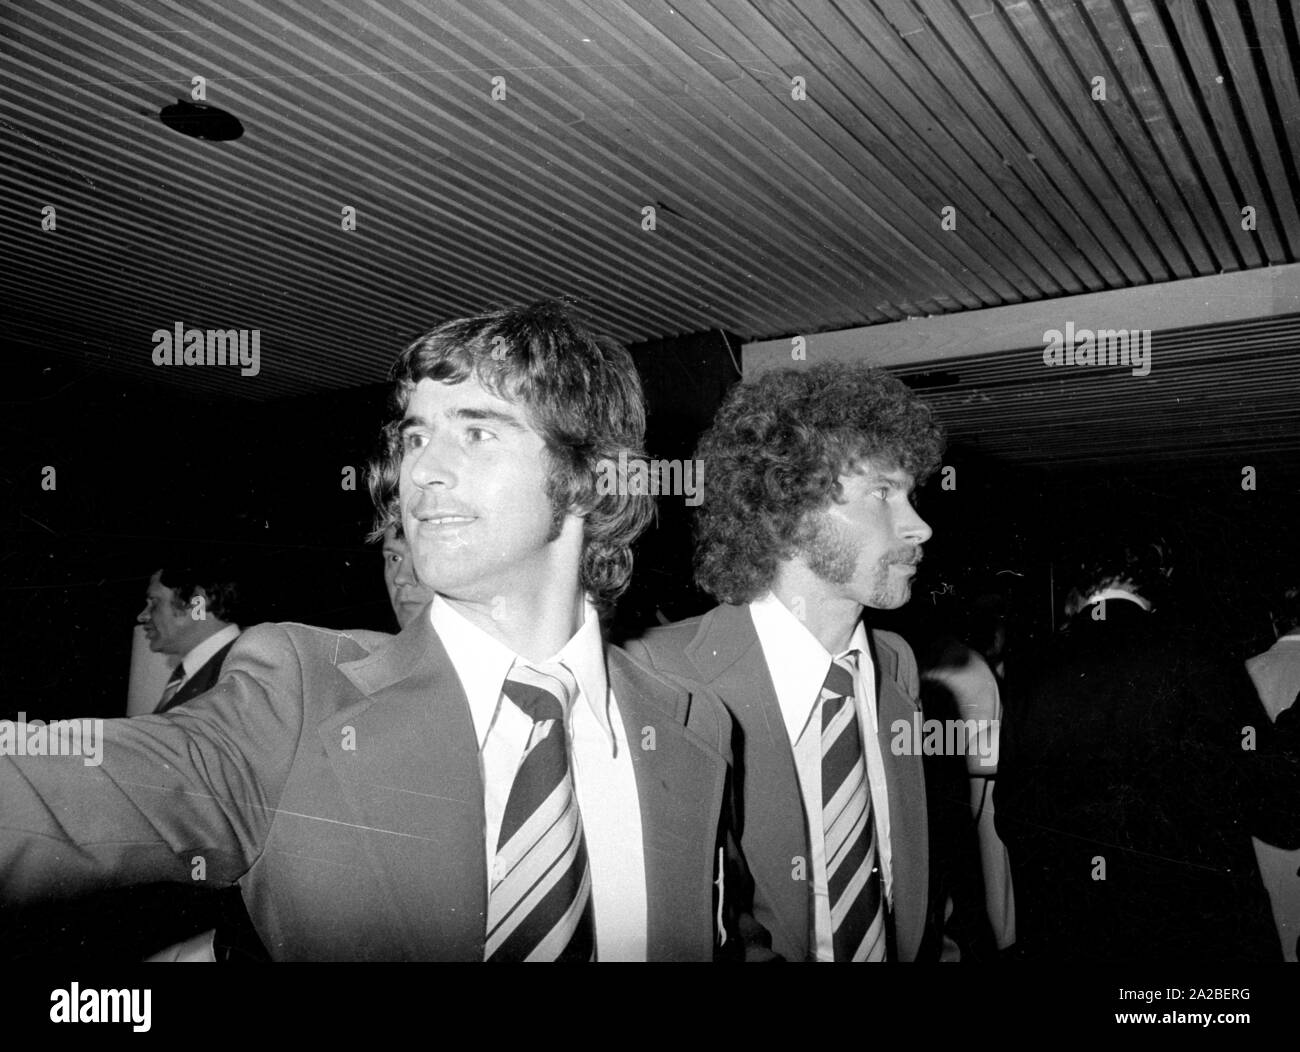 The footballers Gerd Müller (l.) and Paul Breitner (r.) at the banquet of the Federal President in the Hilton Hotel in Munich. Stock Photo